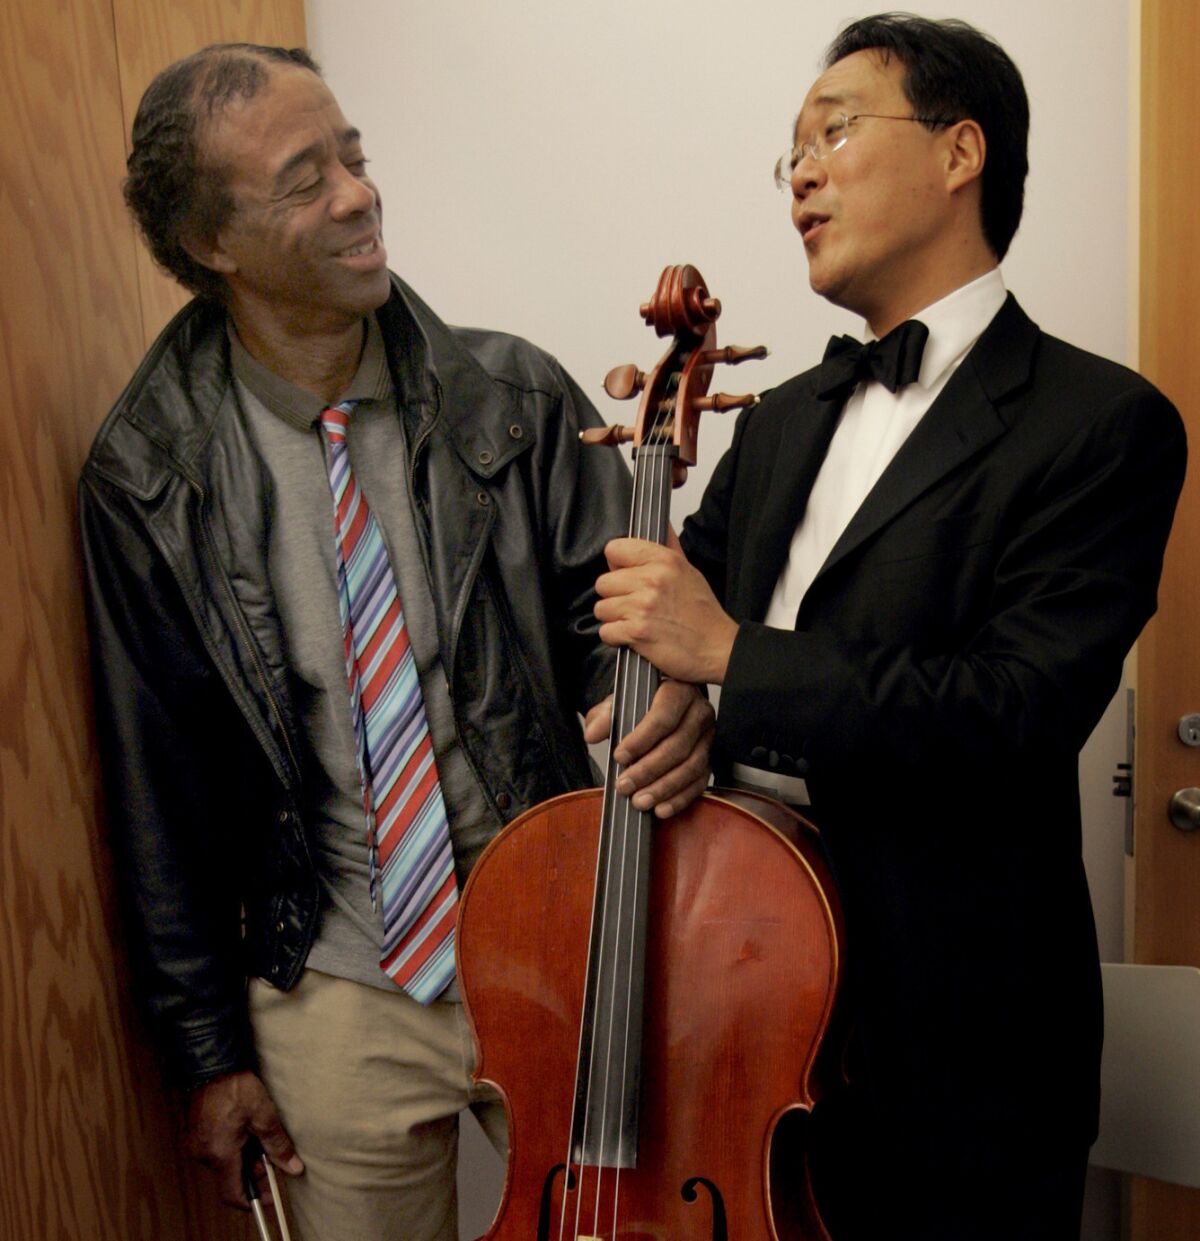 Nathaniel Anthony Ayers and Yo-Yo Ma, who attended Juilliard at the same time, chat at Walt Disney Concert Hall.